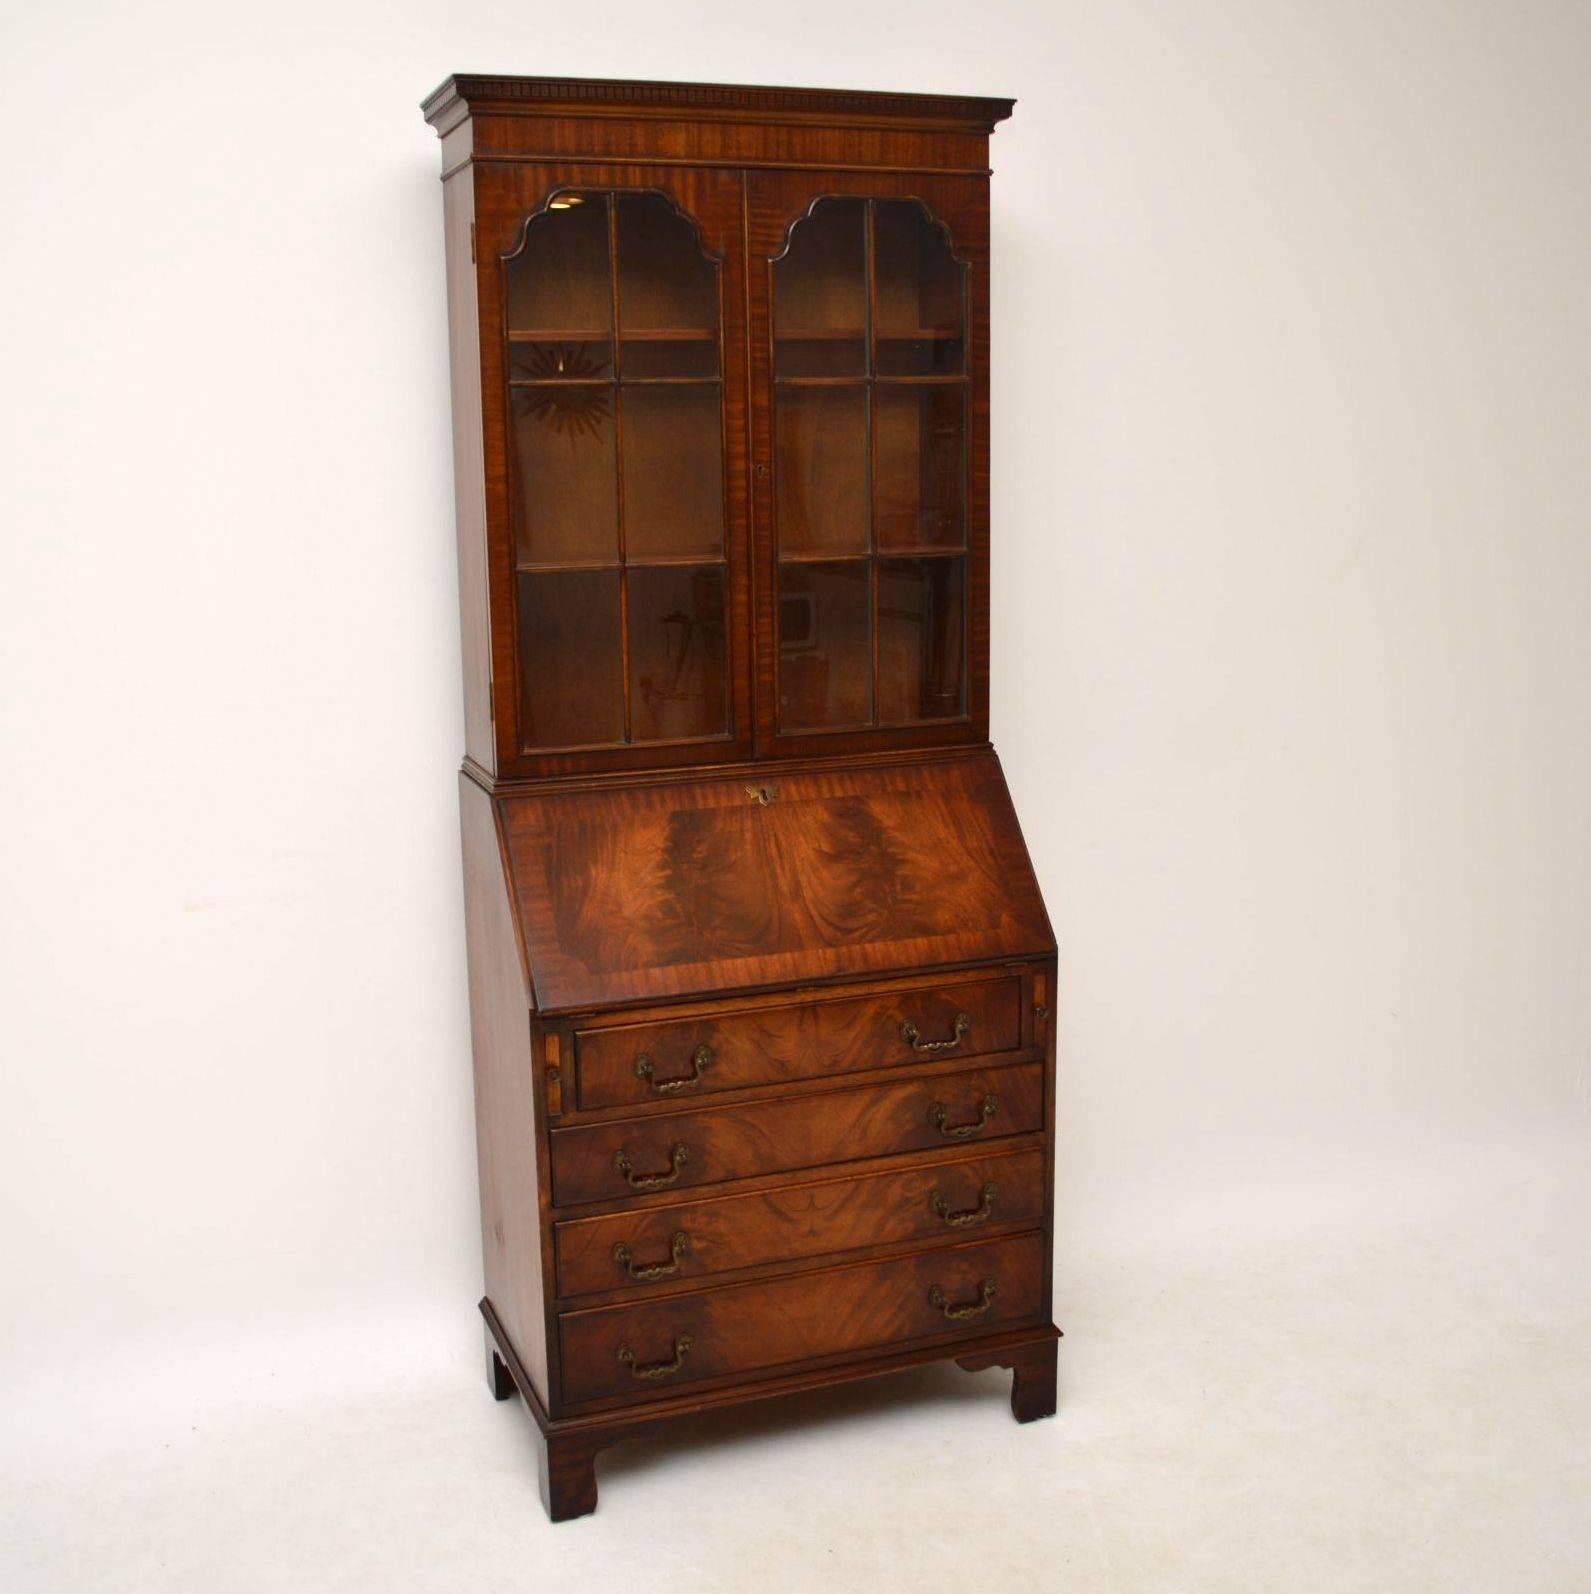 Antique Georgian style mahogany bureau bookcase in excellent condition and dating from around the 1950s period. It has double arched astral-glazed doors, with adjustable bookshelves inside. The writing section has a Fine array of small drawers, a